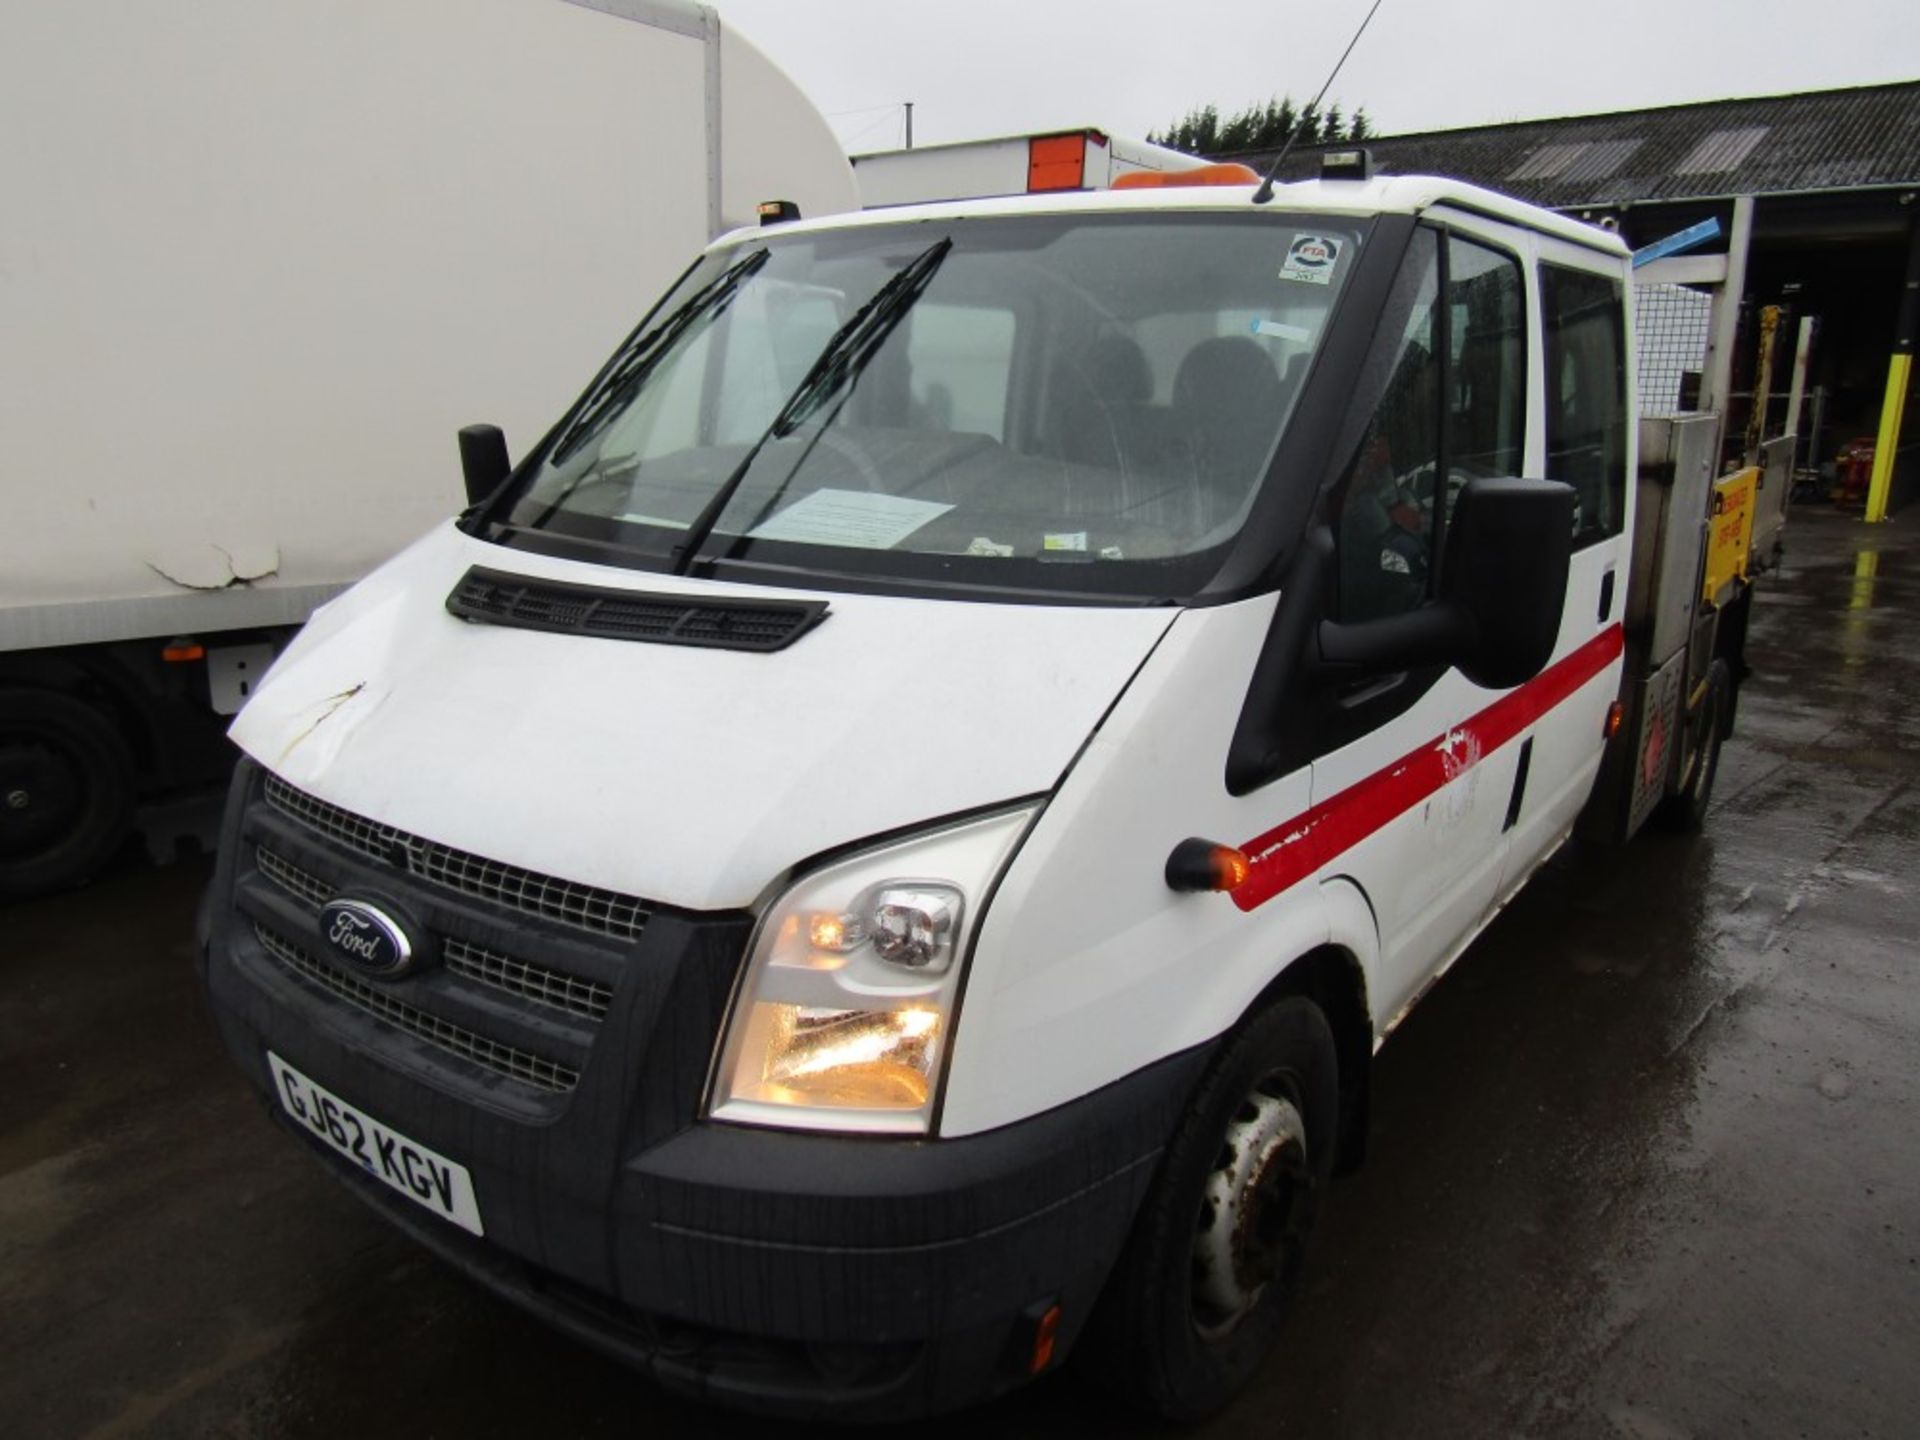 62 reg FORD TRANSIT 155 T460 RWD CREW CAB TIPPER (NON RUNNER) (DIRECT COUNCIL) 1ST REG 10/12, TEST - Image 2 of 6